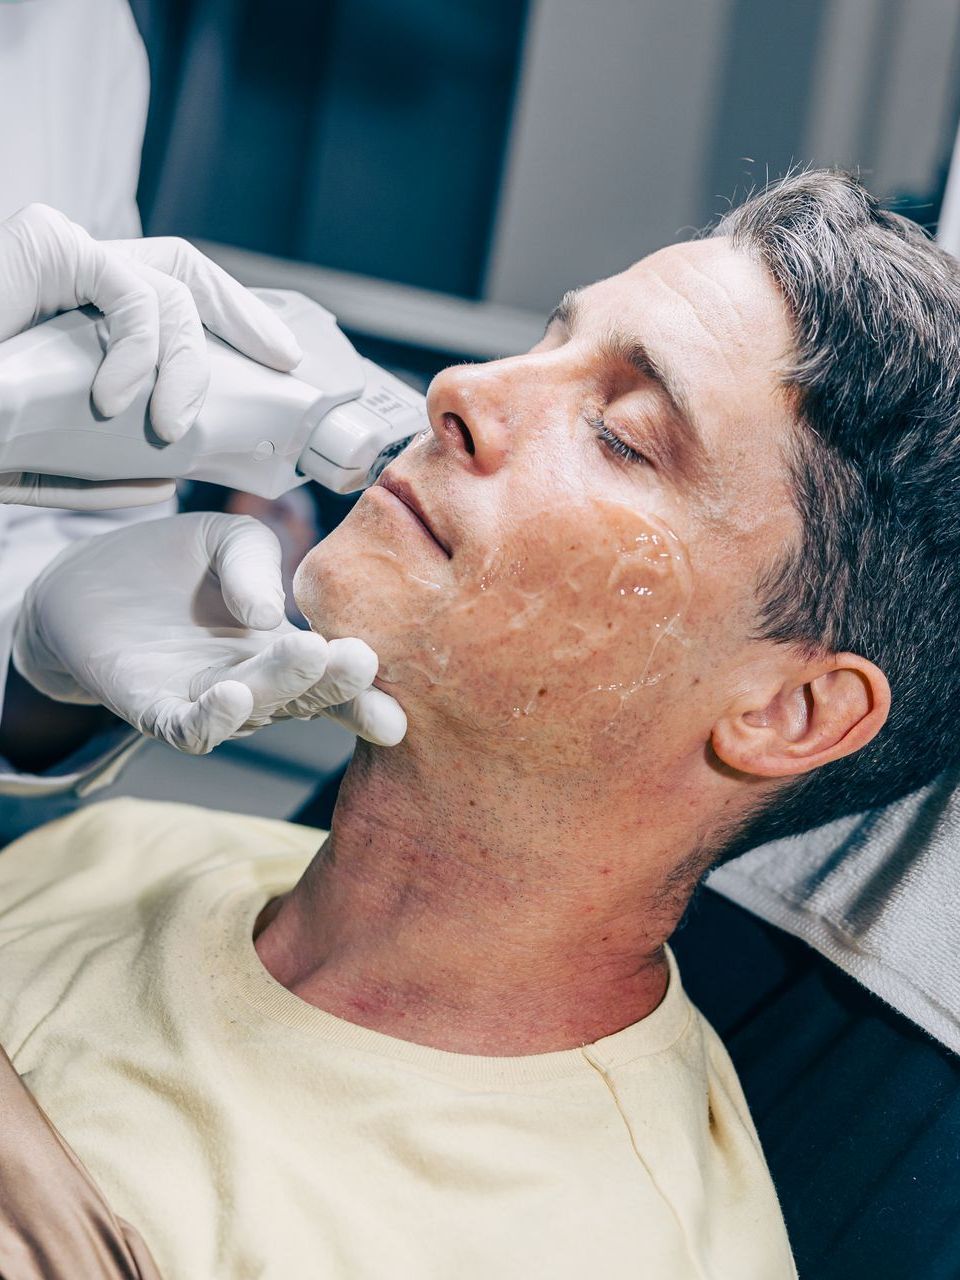 a man in a yellow shirt is getting a treatment on his face